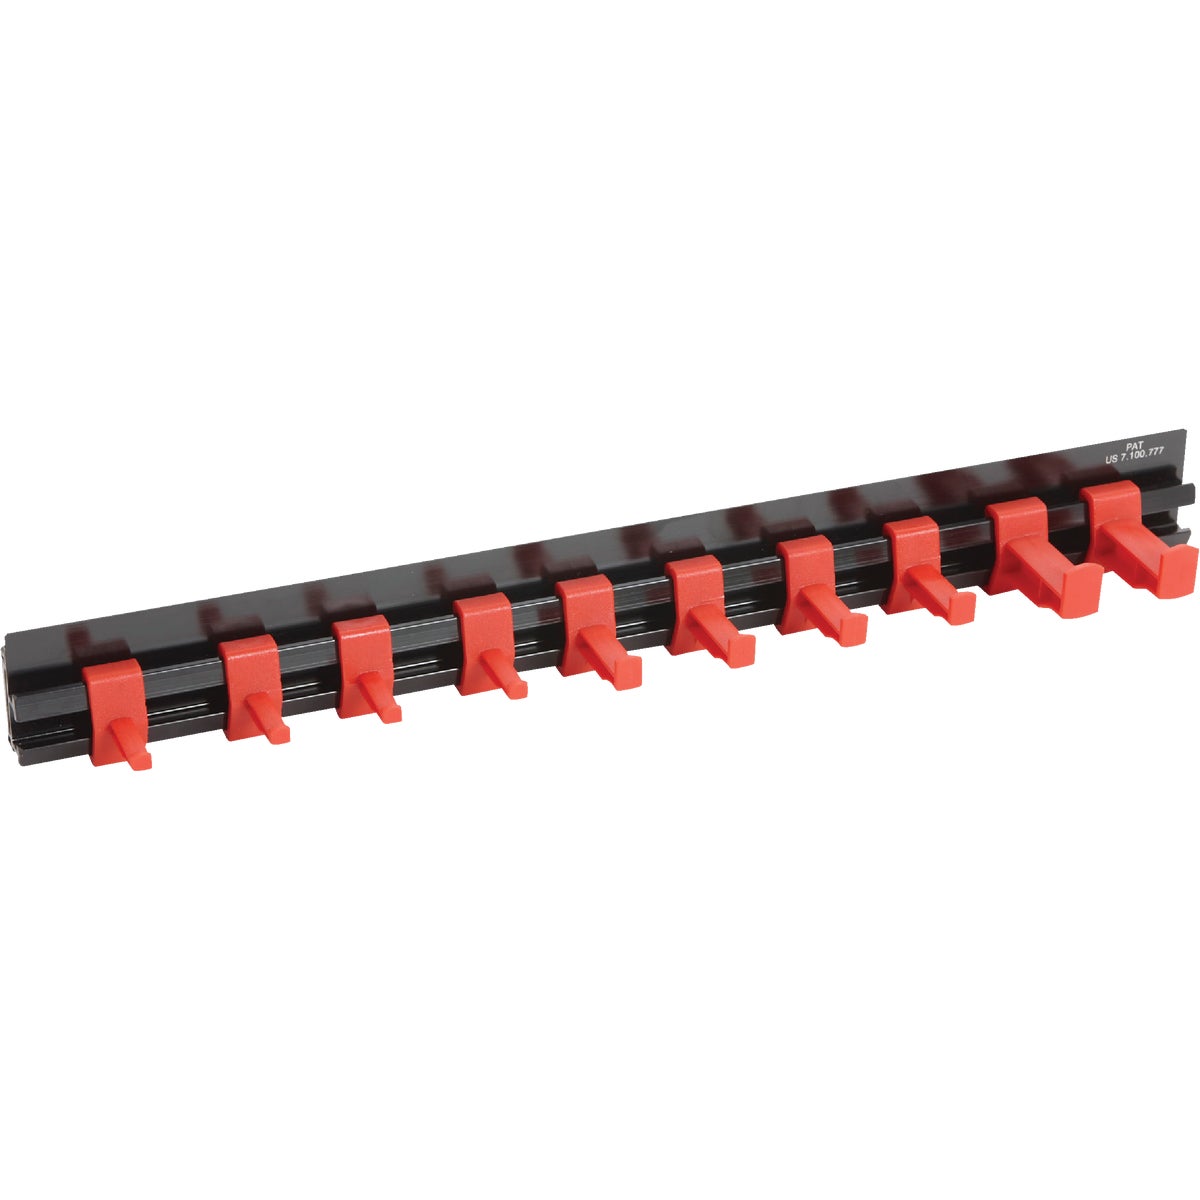 Channellock 10-Wrench Combination Wrench Holder